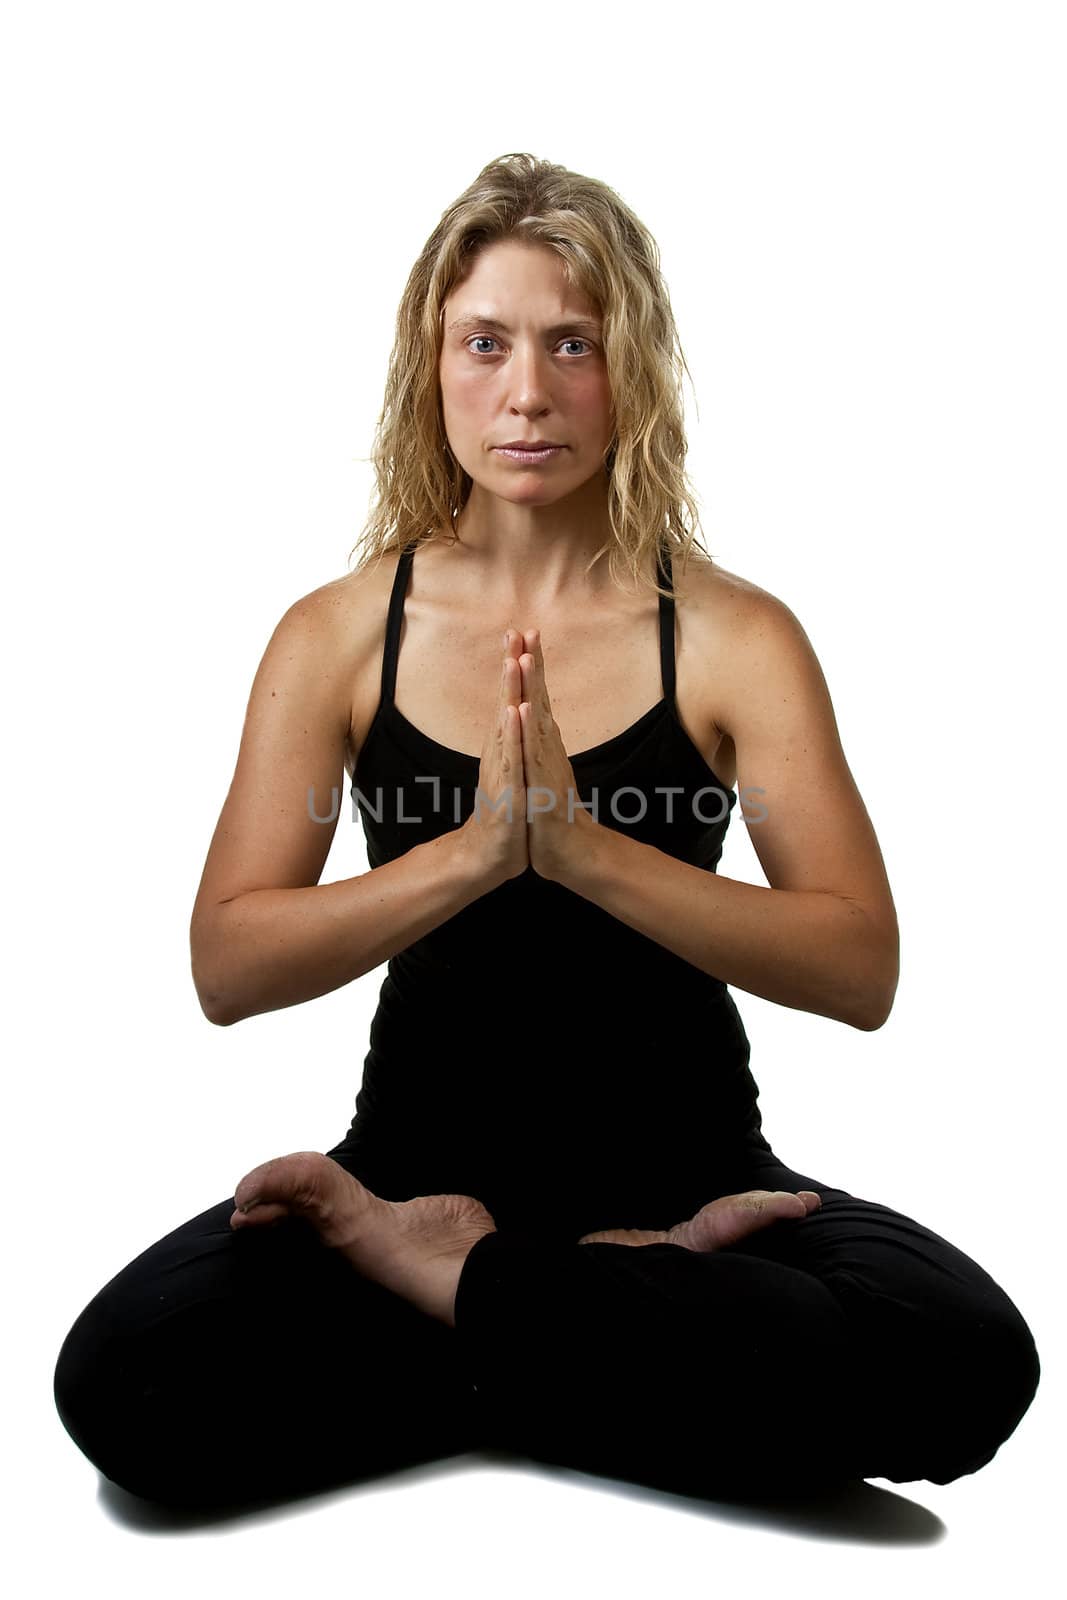 Blond woman in lotus position by totony